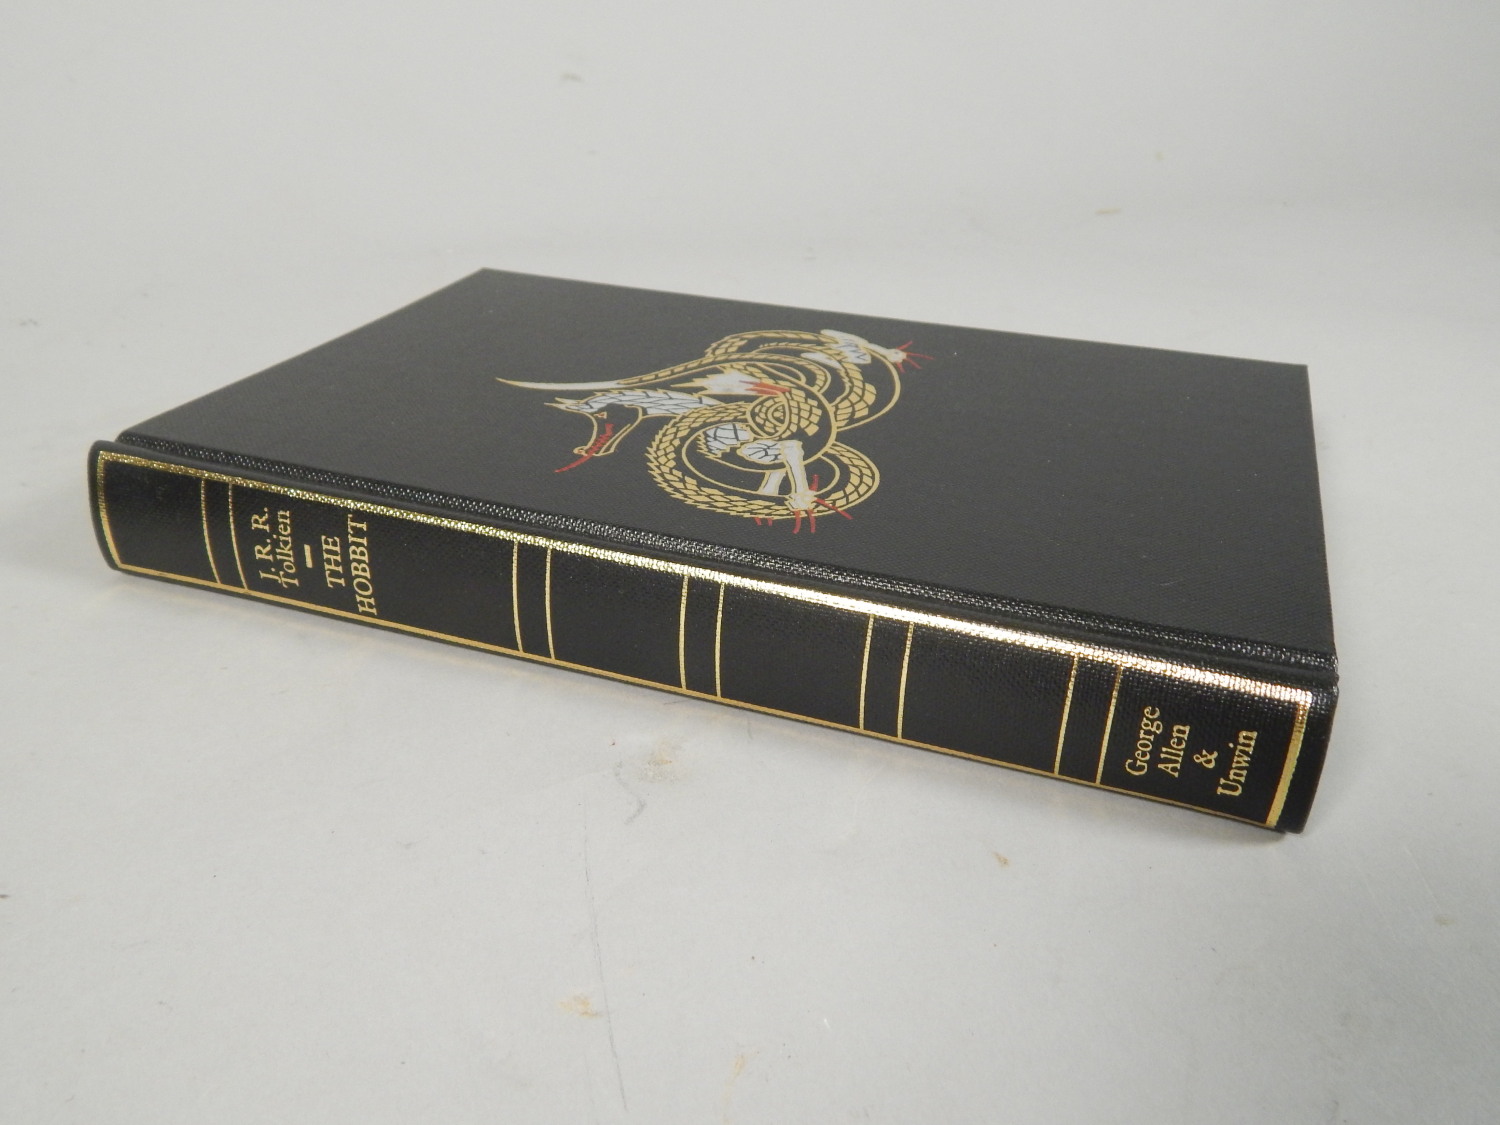 A deluxe edition of JRR Tolkien's The Hobbit, by George Allen and Unwin, in presentation box. - Image 2 of 3